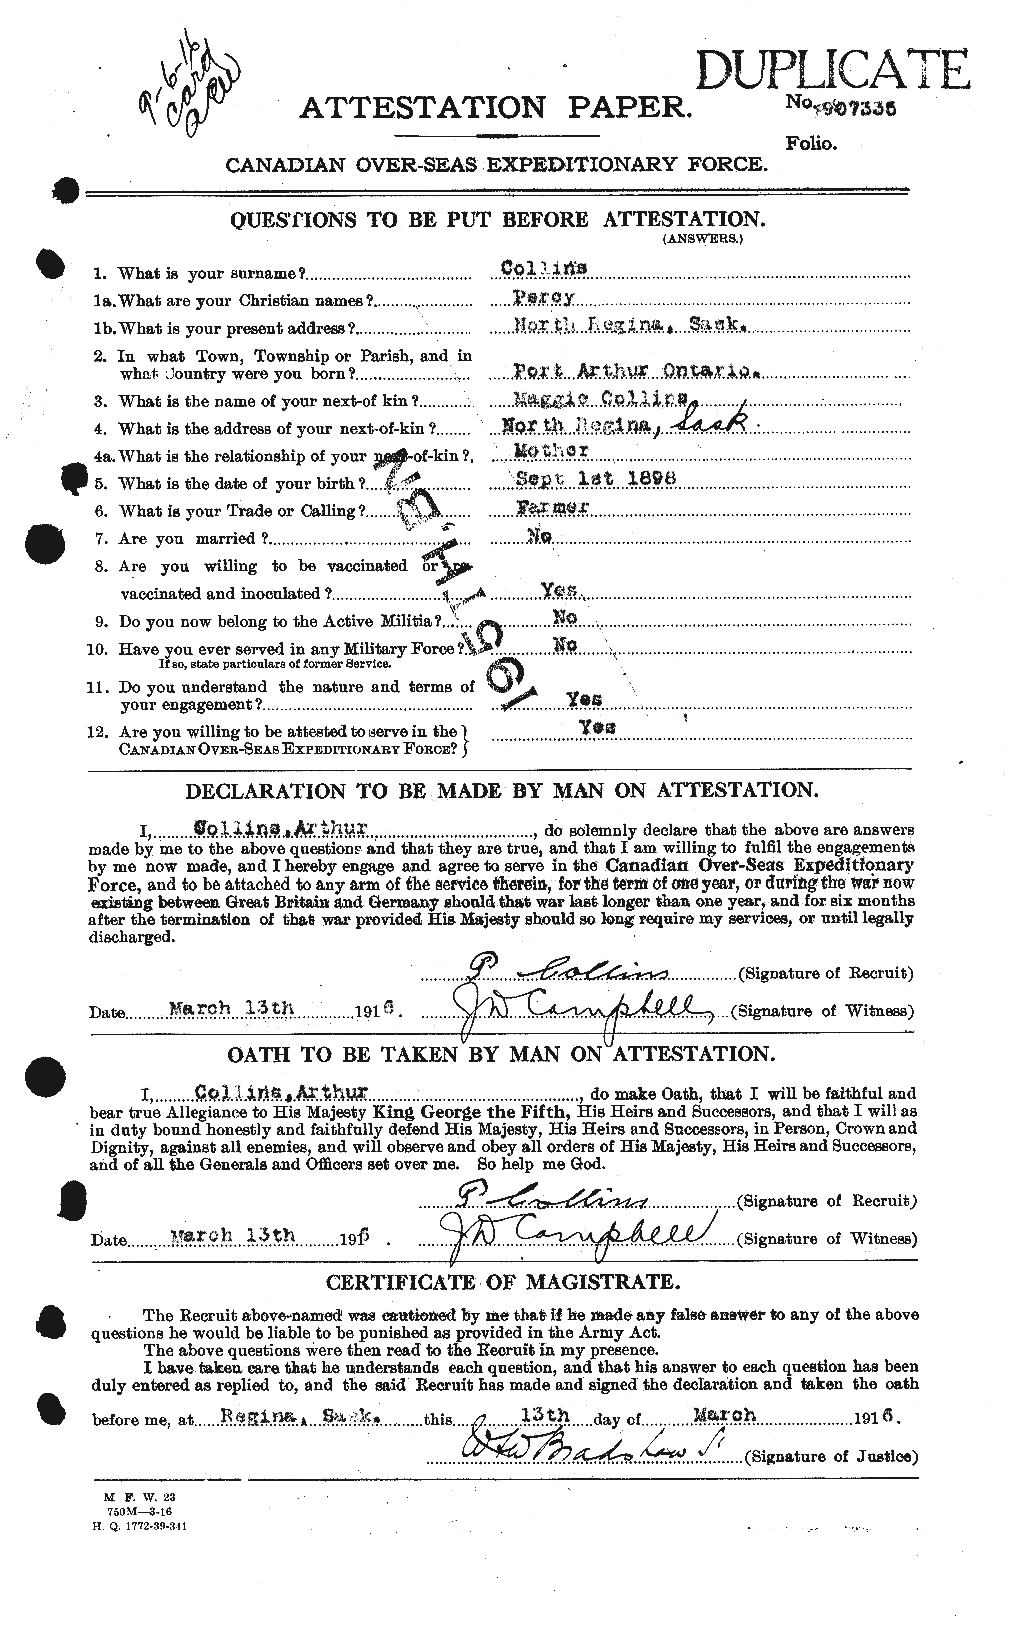 Personnel Records of the First World War - CEF 069298a